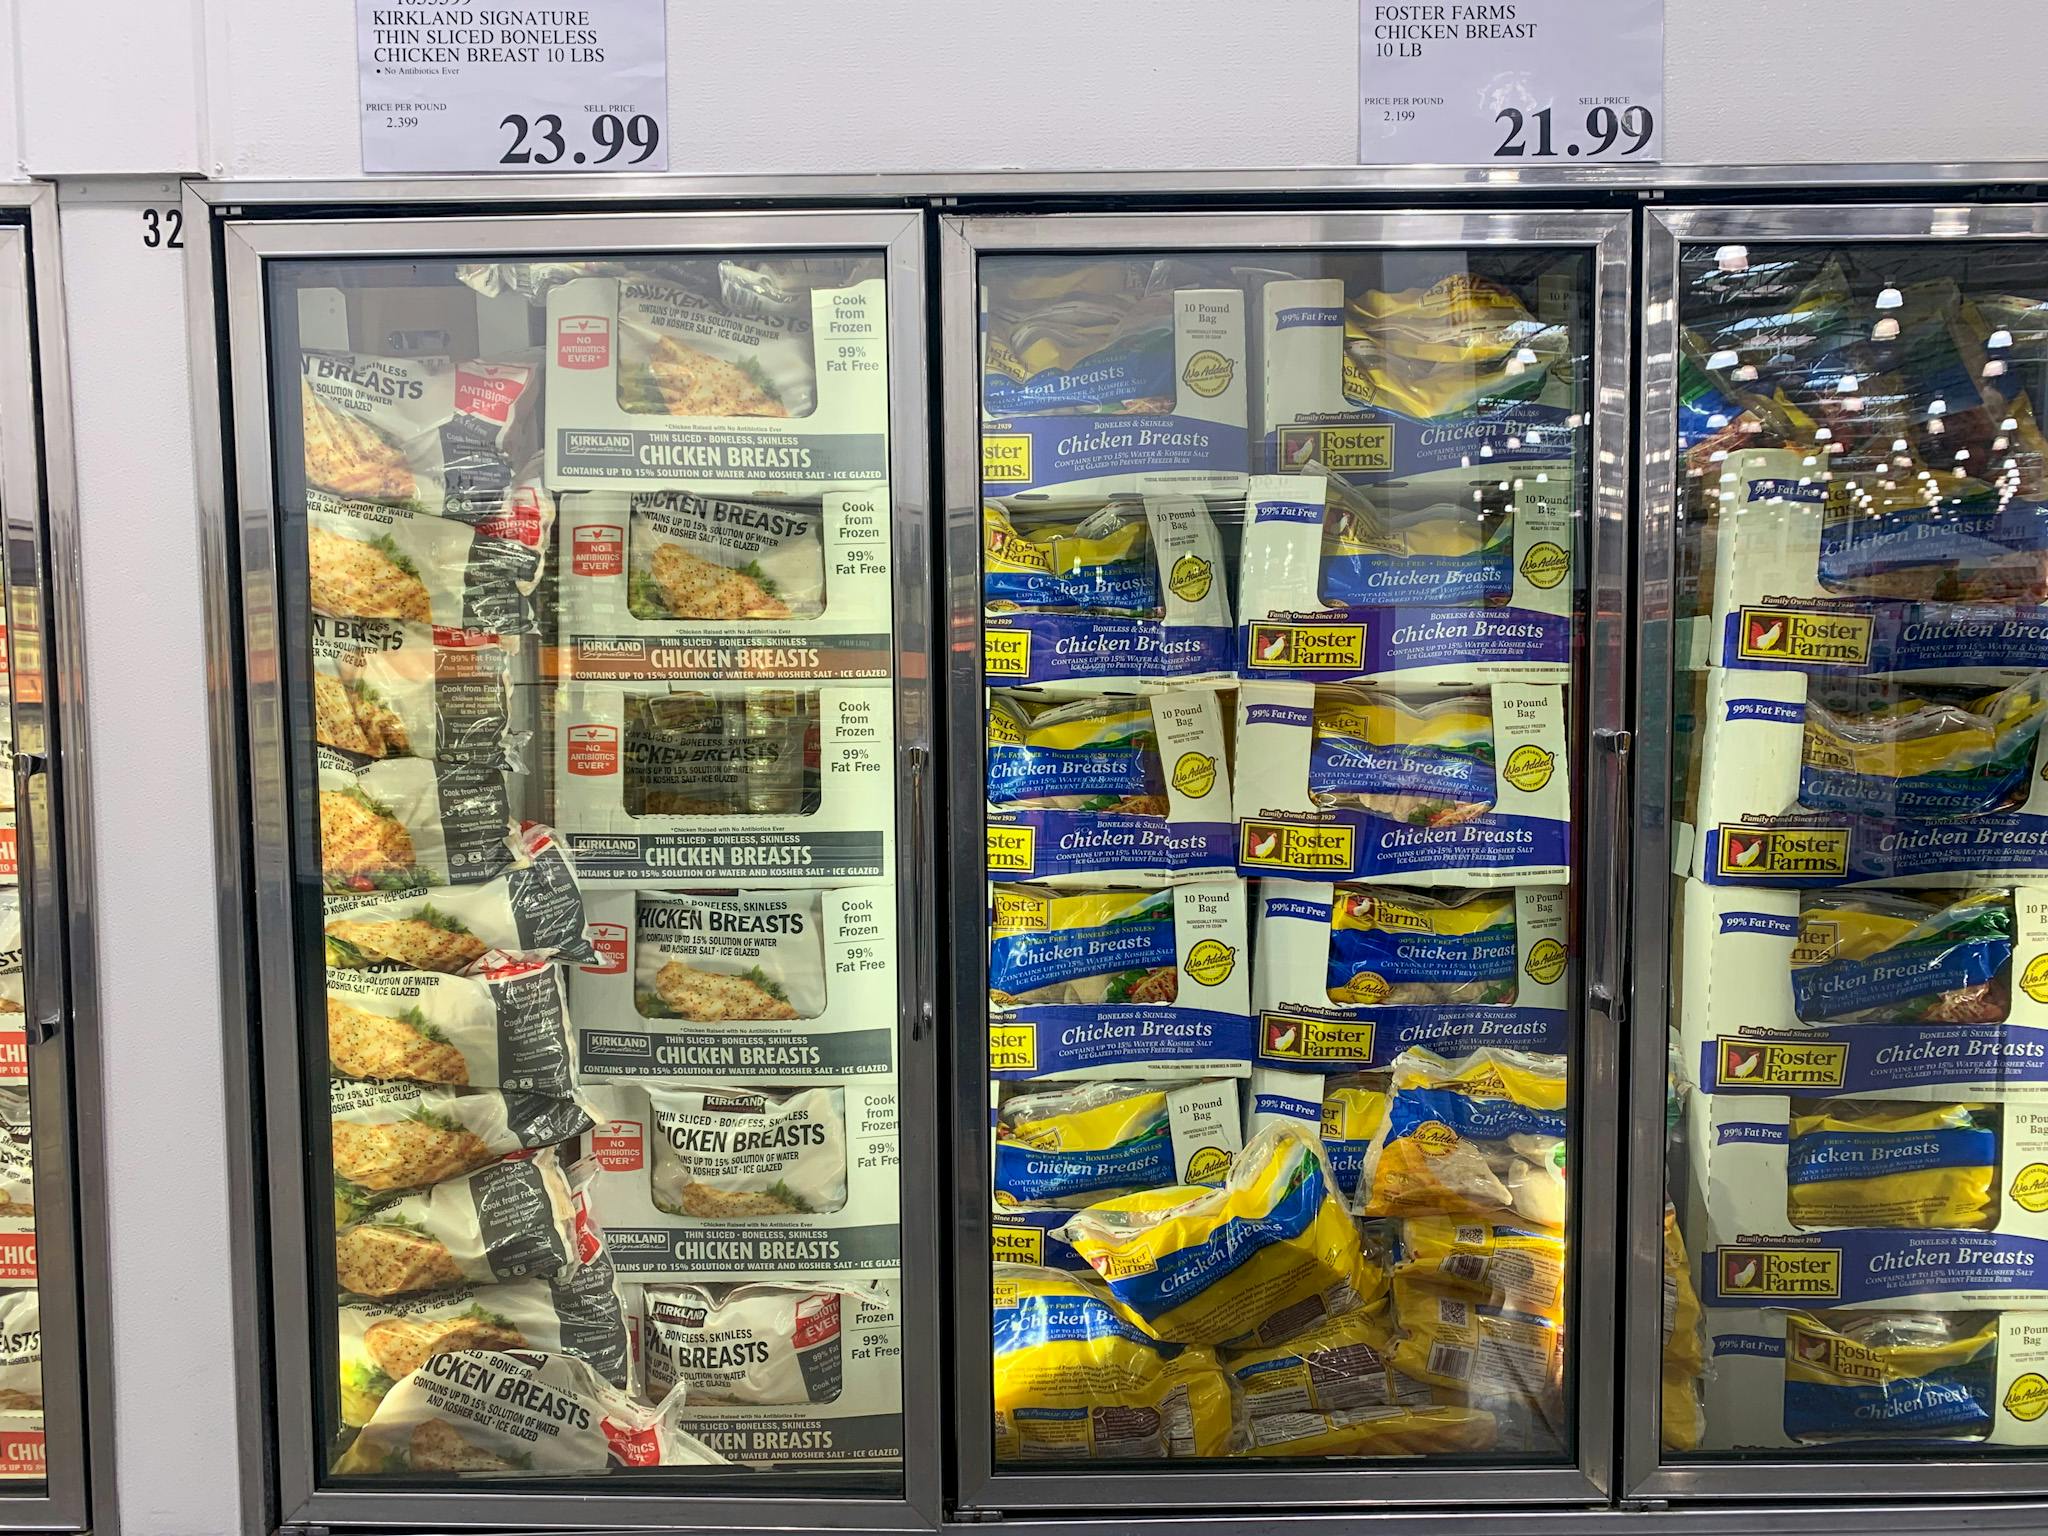 A frozen meat cooler filled with Chicken.